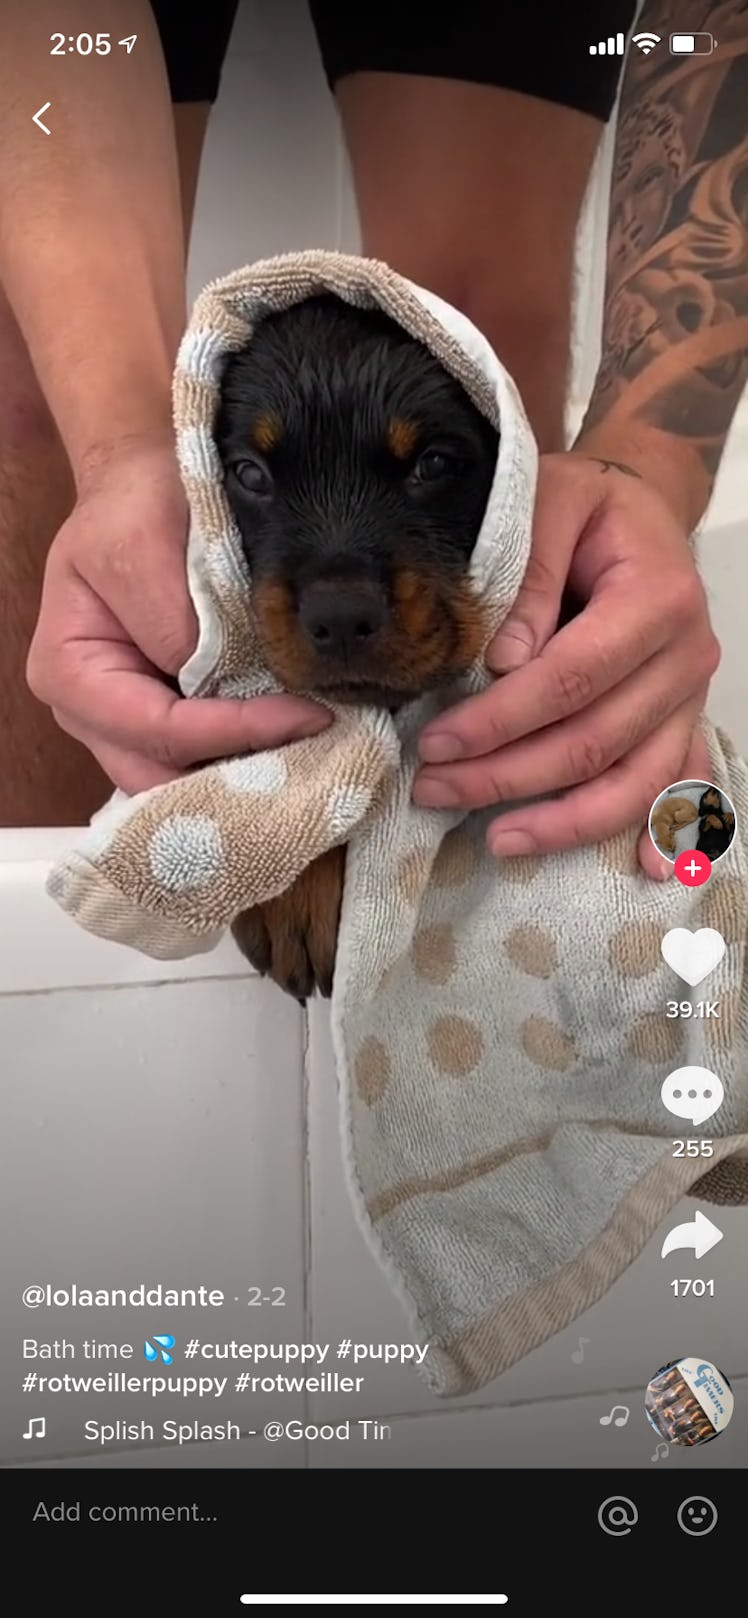 A puppy is wrapped up in a towel after taking a bath.